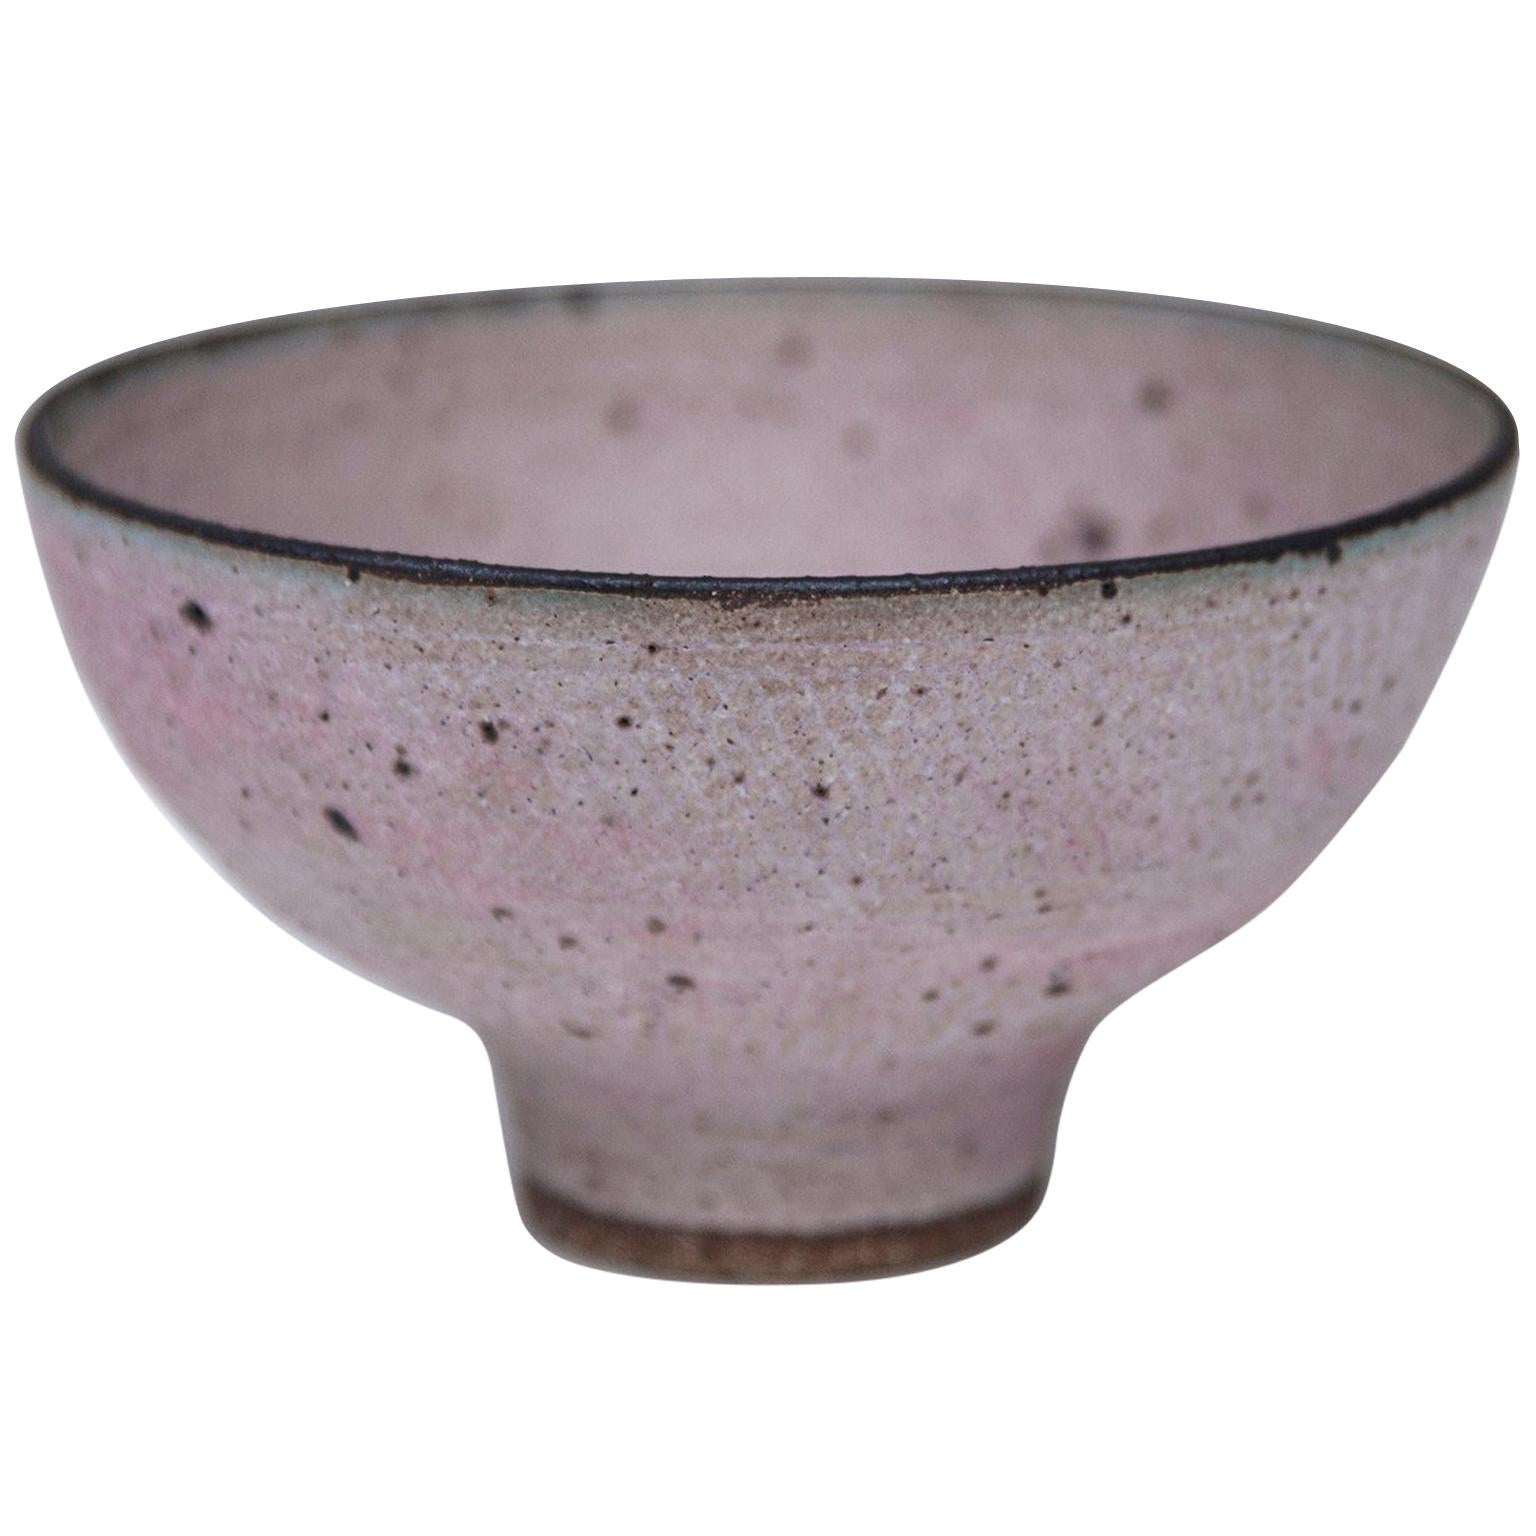 Lucie Rie Rose Colored Bowl 1980 Signed For Sale